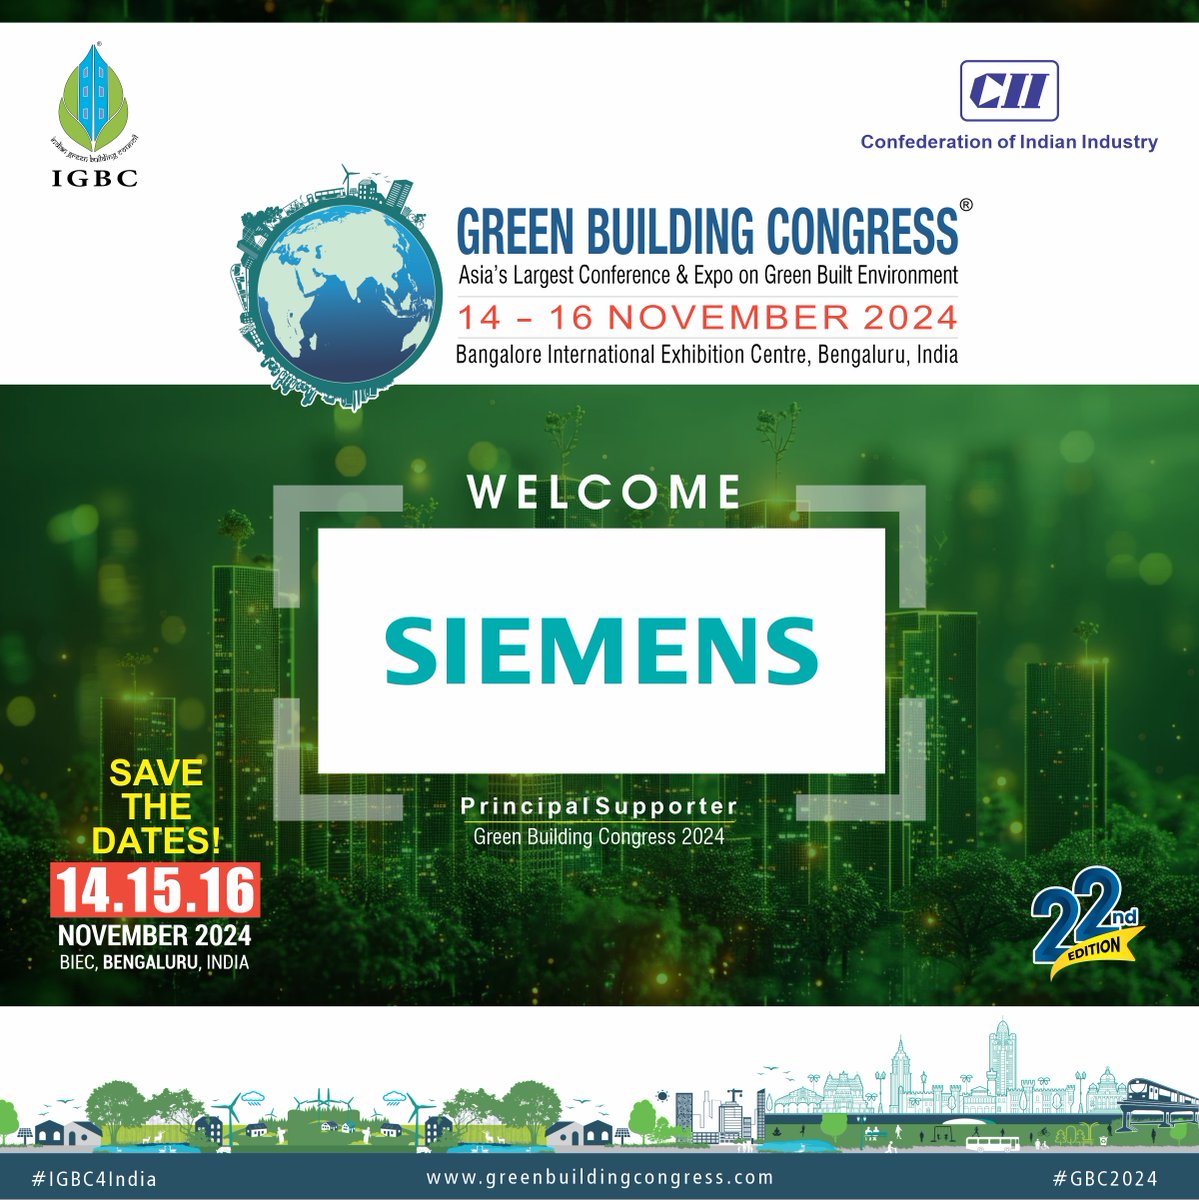 🌱 We're pleased to announce that Siemens Ltd has joined us as a Principal Supporter for the IGBC GBC 2024, scheduled to be held from 14 -16 November 2024 at BIEC, Bengaluru, India! 🎉 Learn more here - greenbuildingcongress.com @FollowCII @SiemensIndia @WorldGBC #igbc #cii